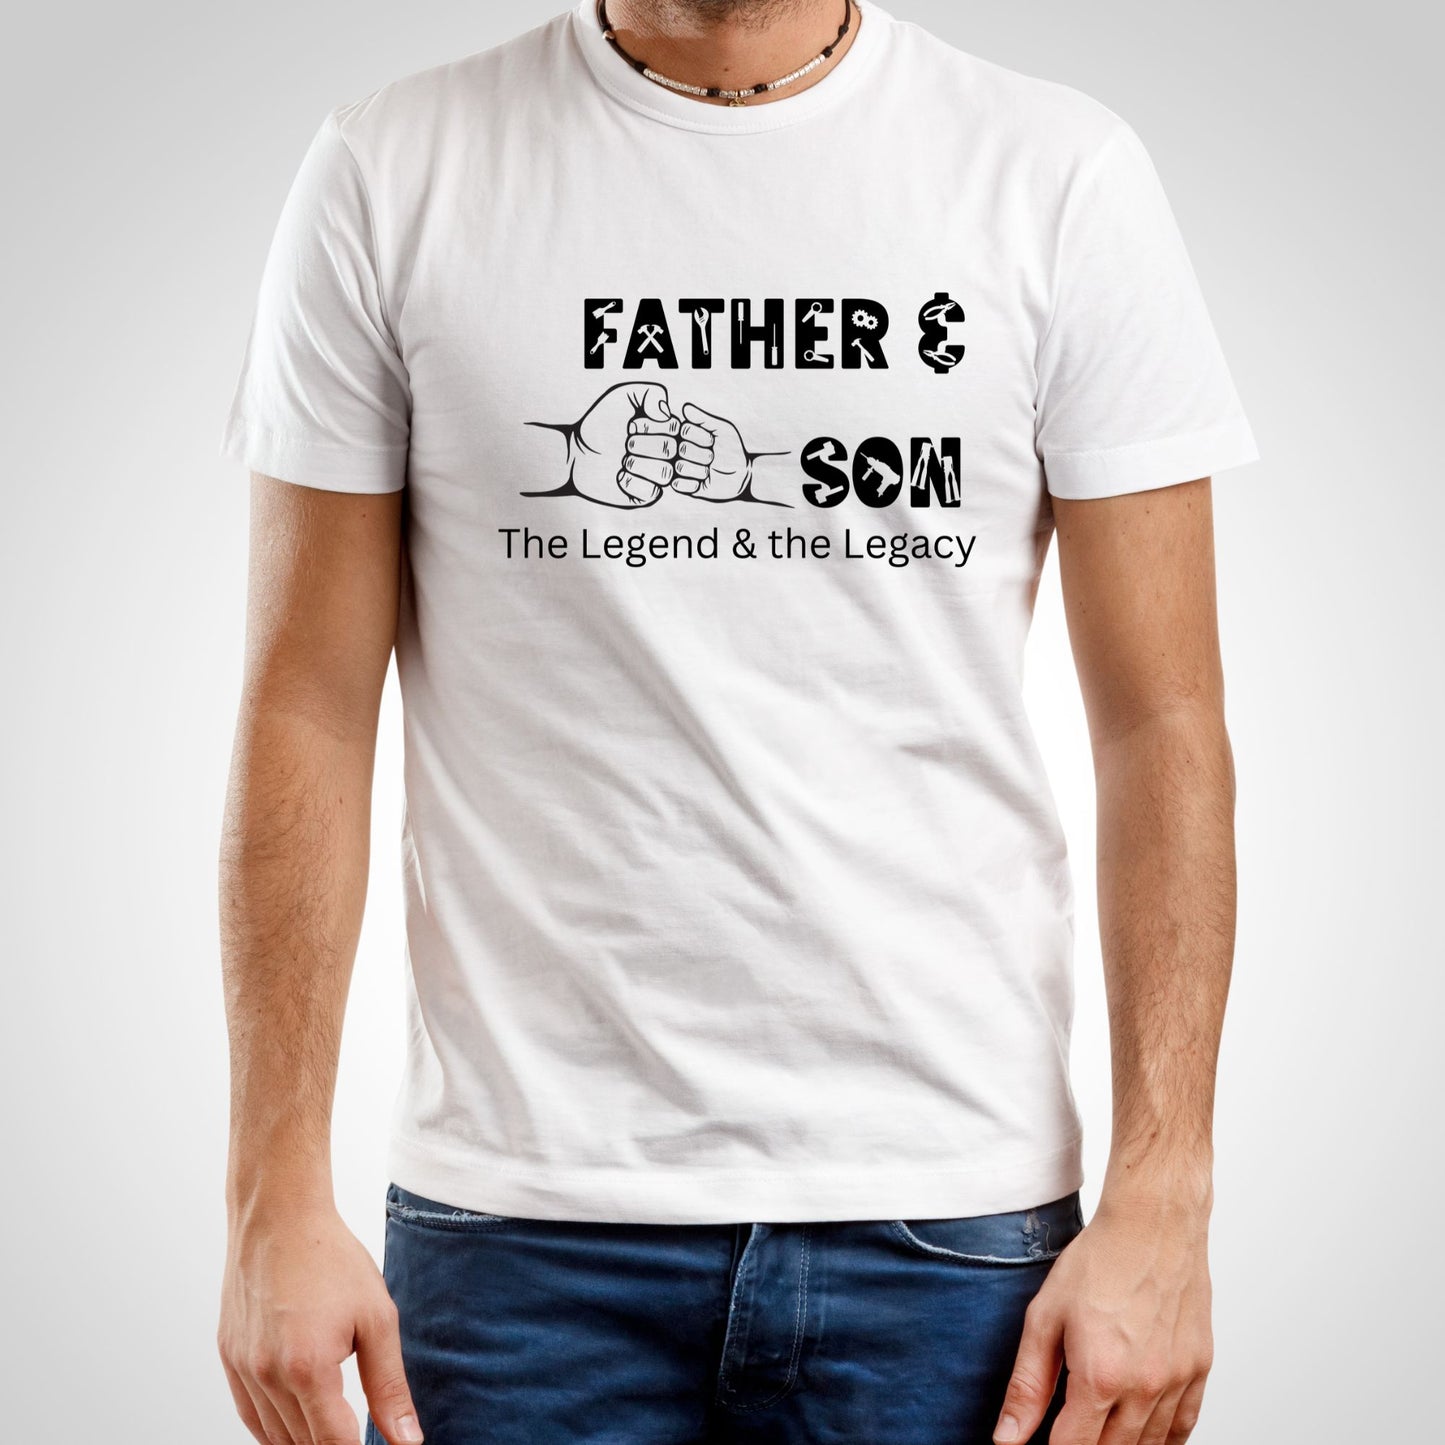 Father and son tee shirt graphic for men